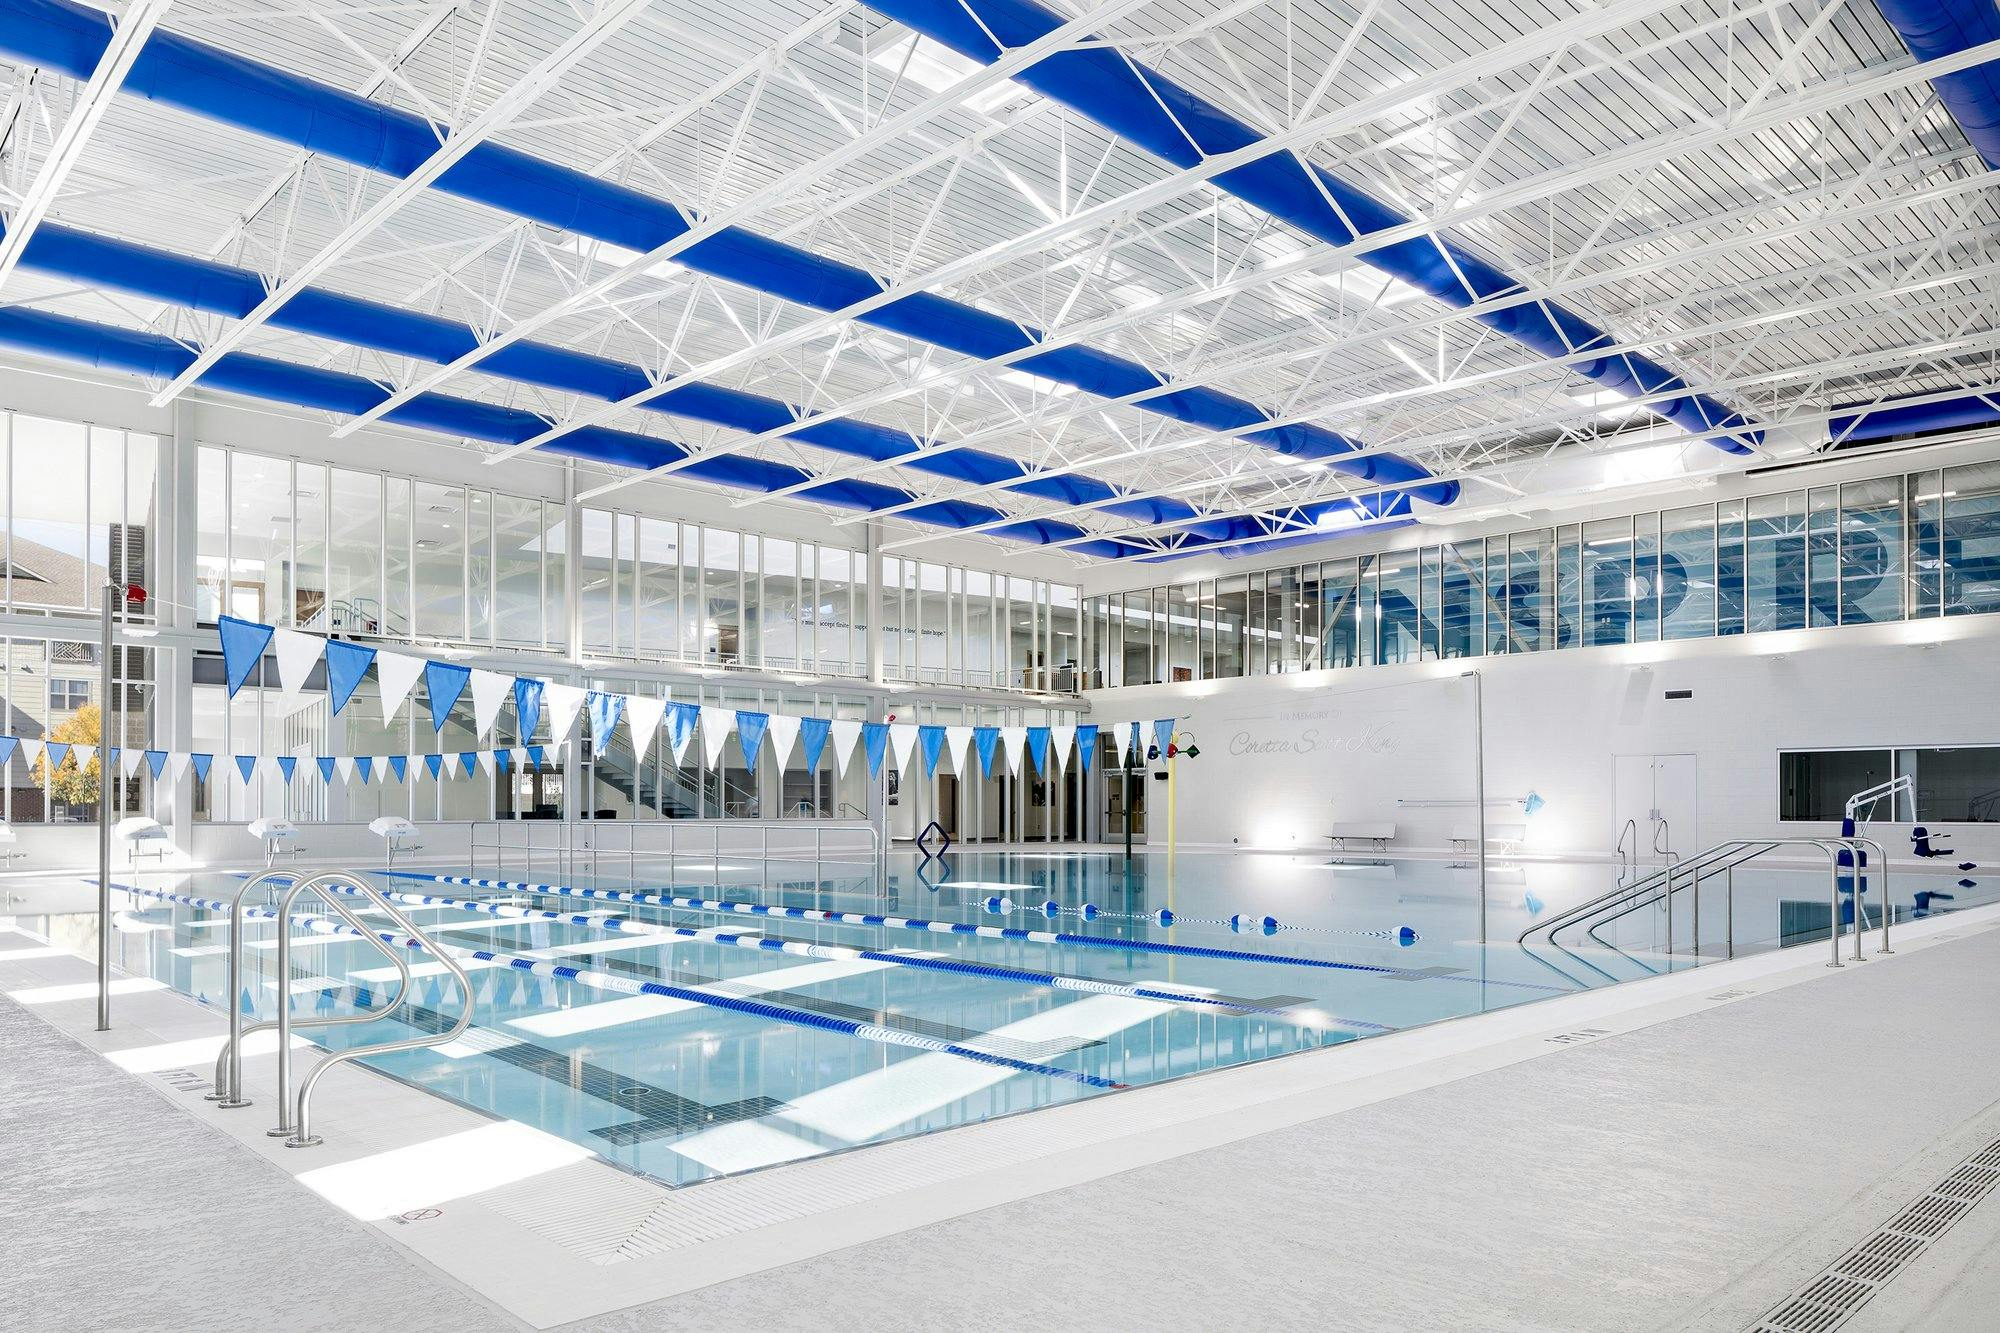 indoor swimming pool with four lanes and an open swimming area